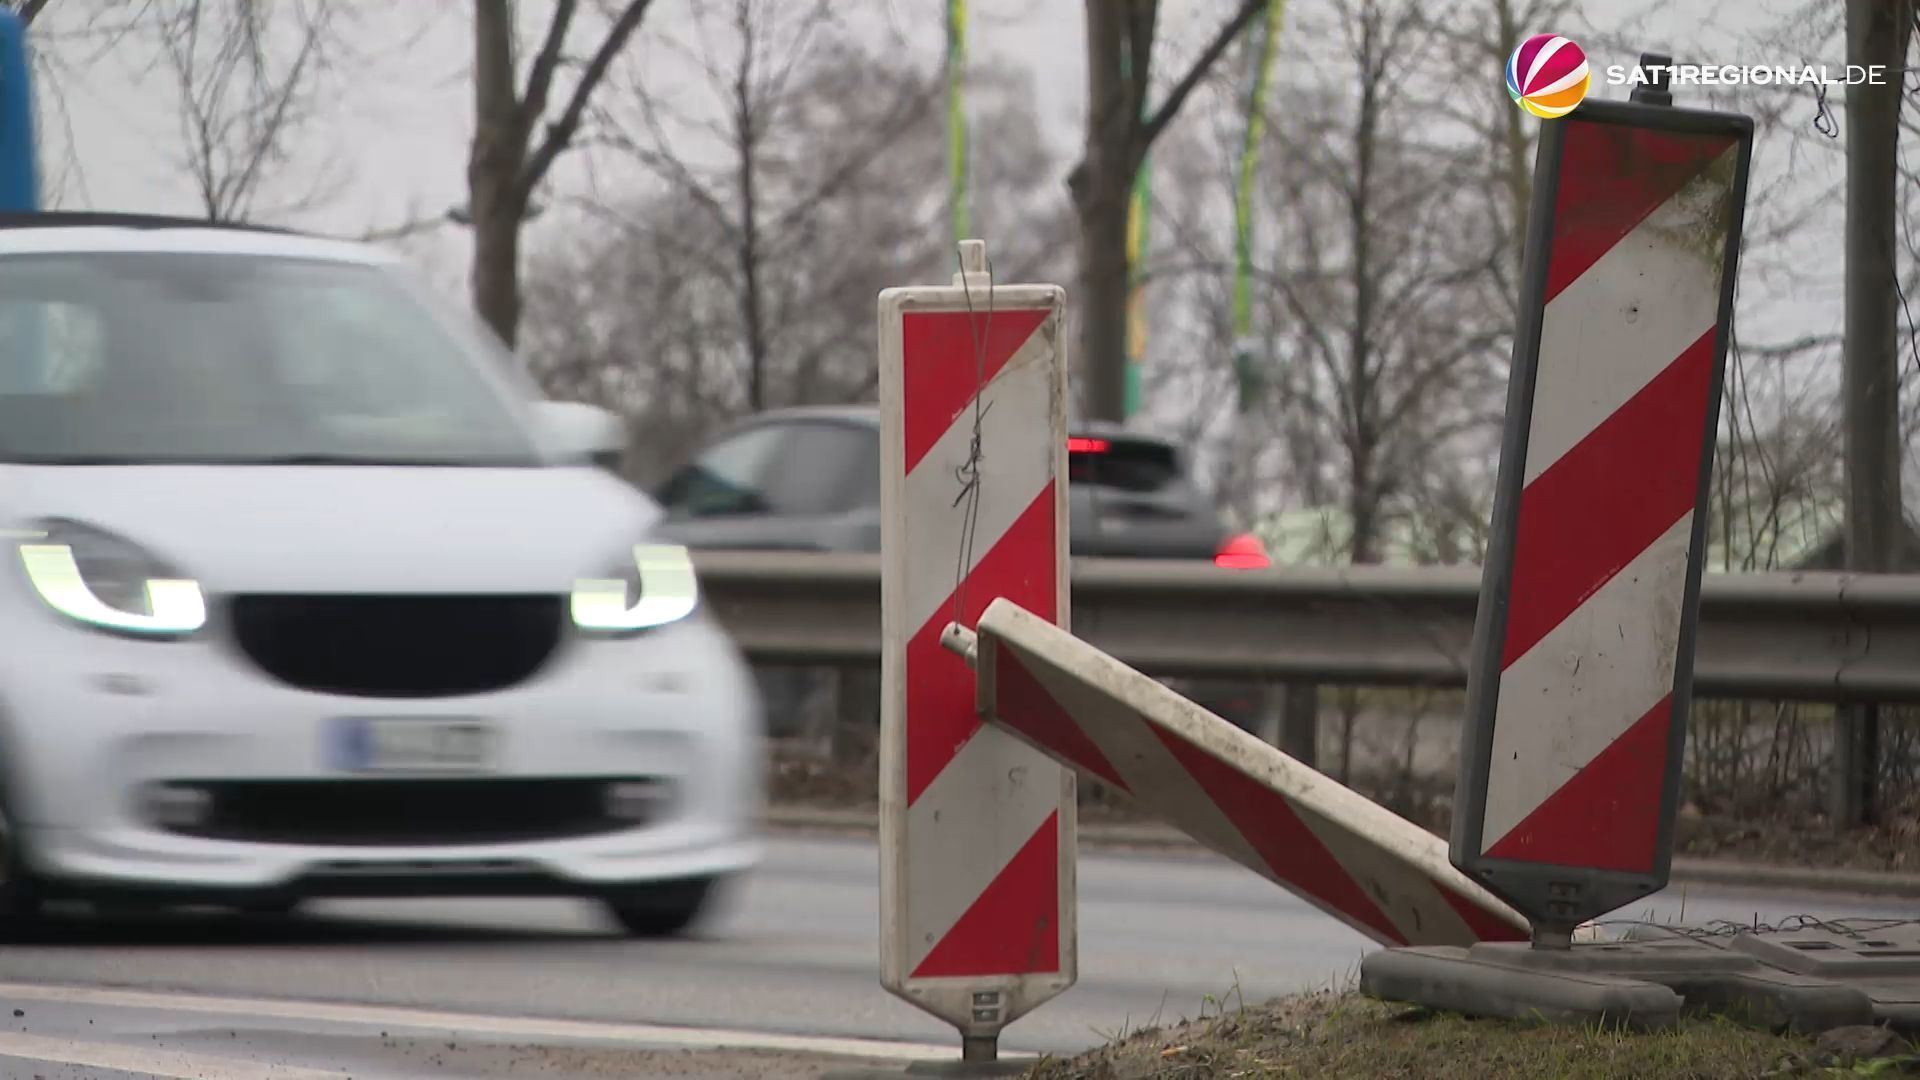 Permanent roadworks: further traffic chaos expected in Kiel